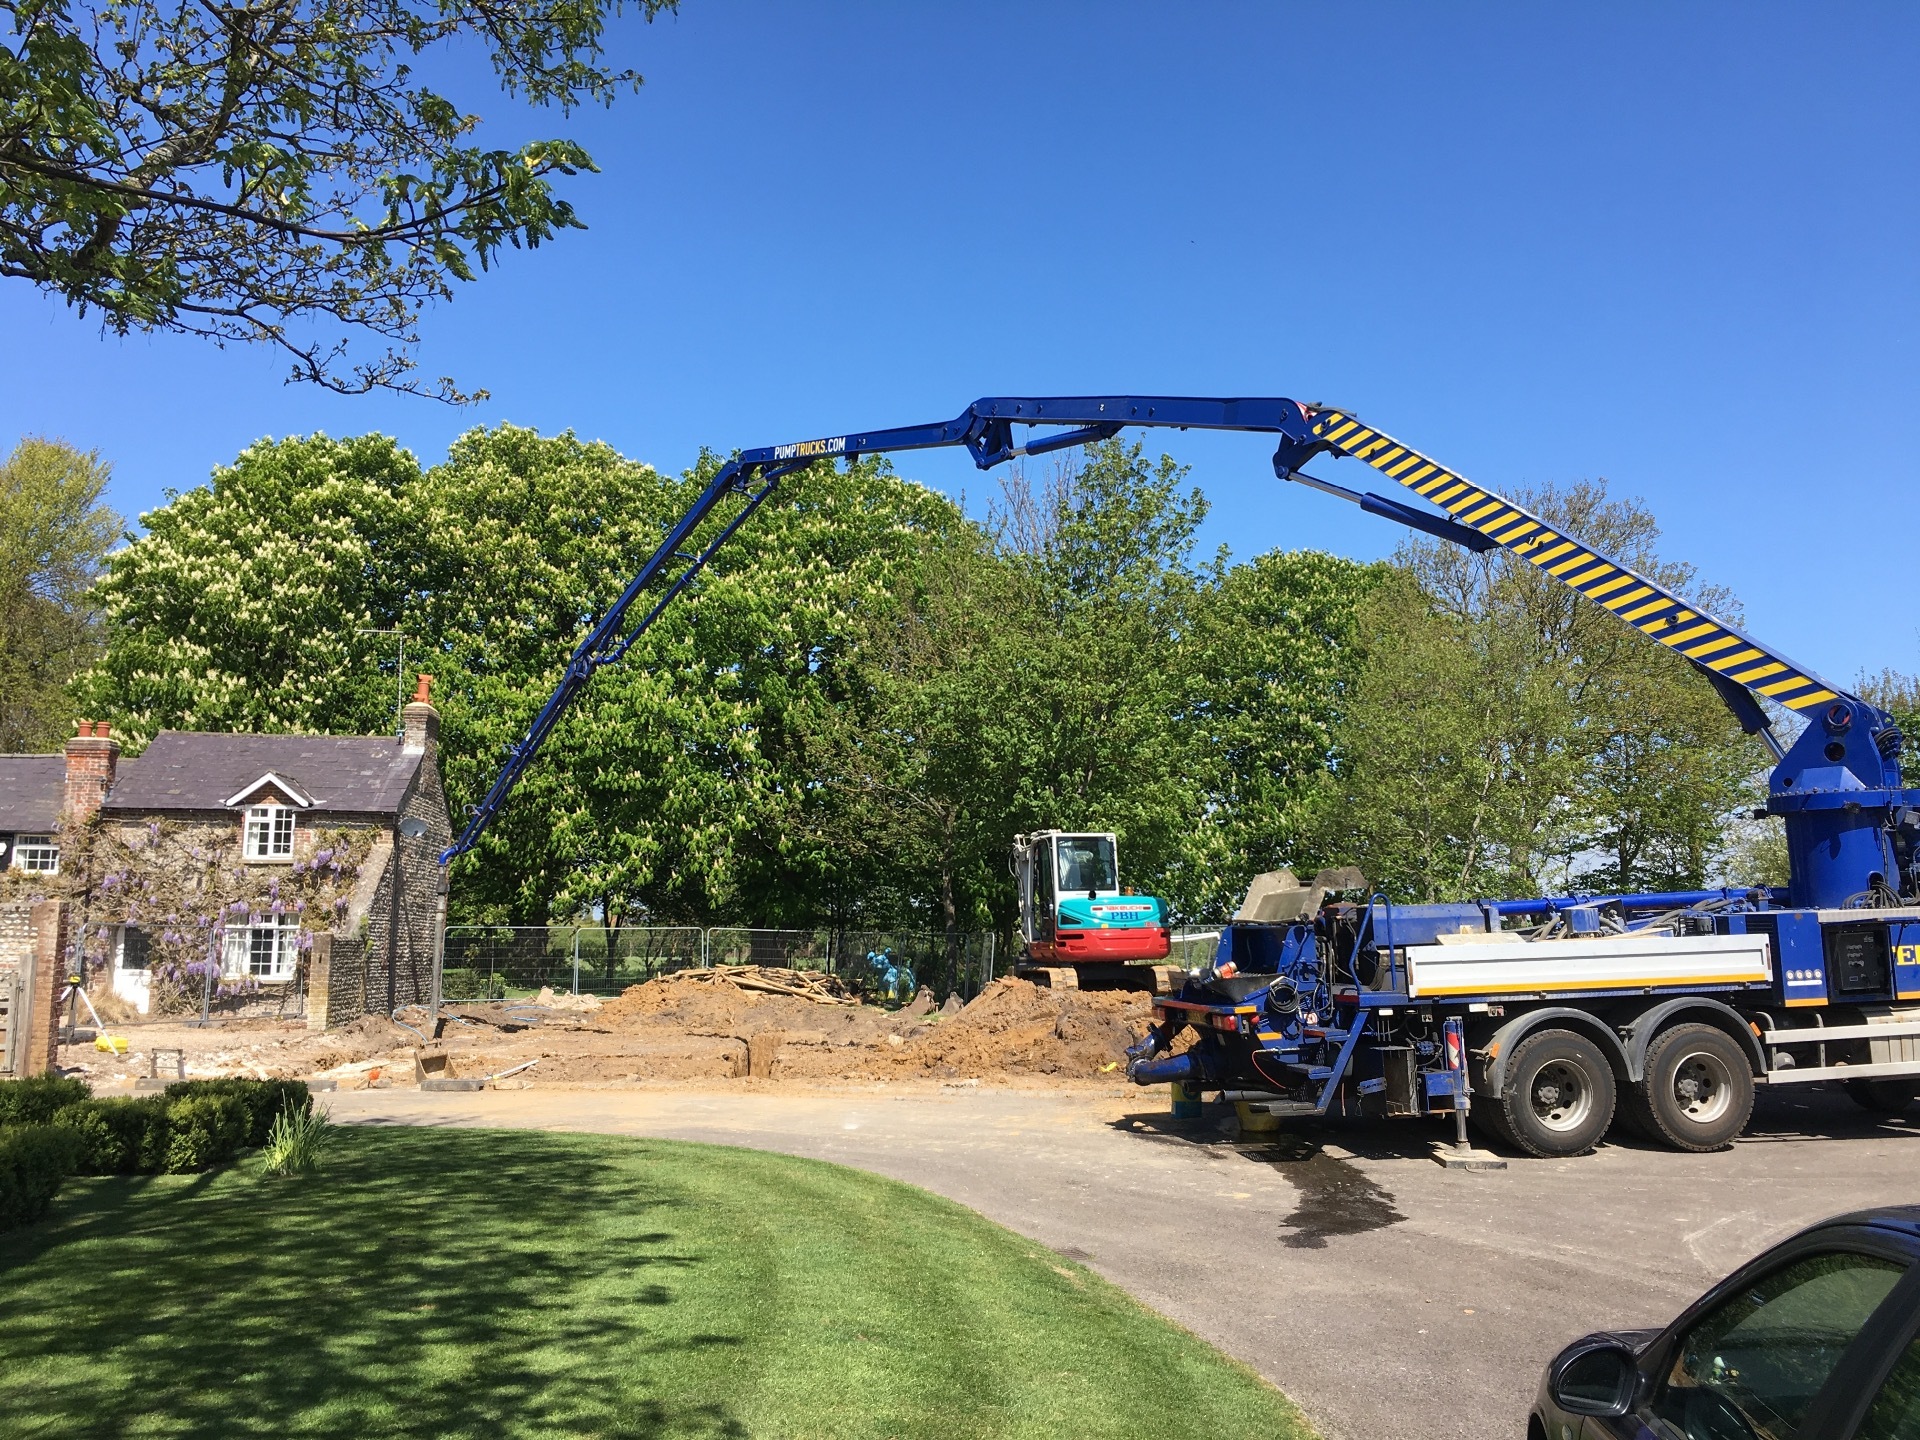 One of K Crumley Construction's mini excavators being unloaded for an equestrian project in West Sussex.